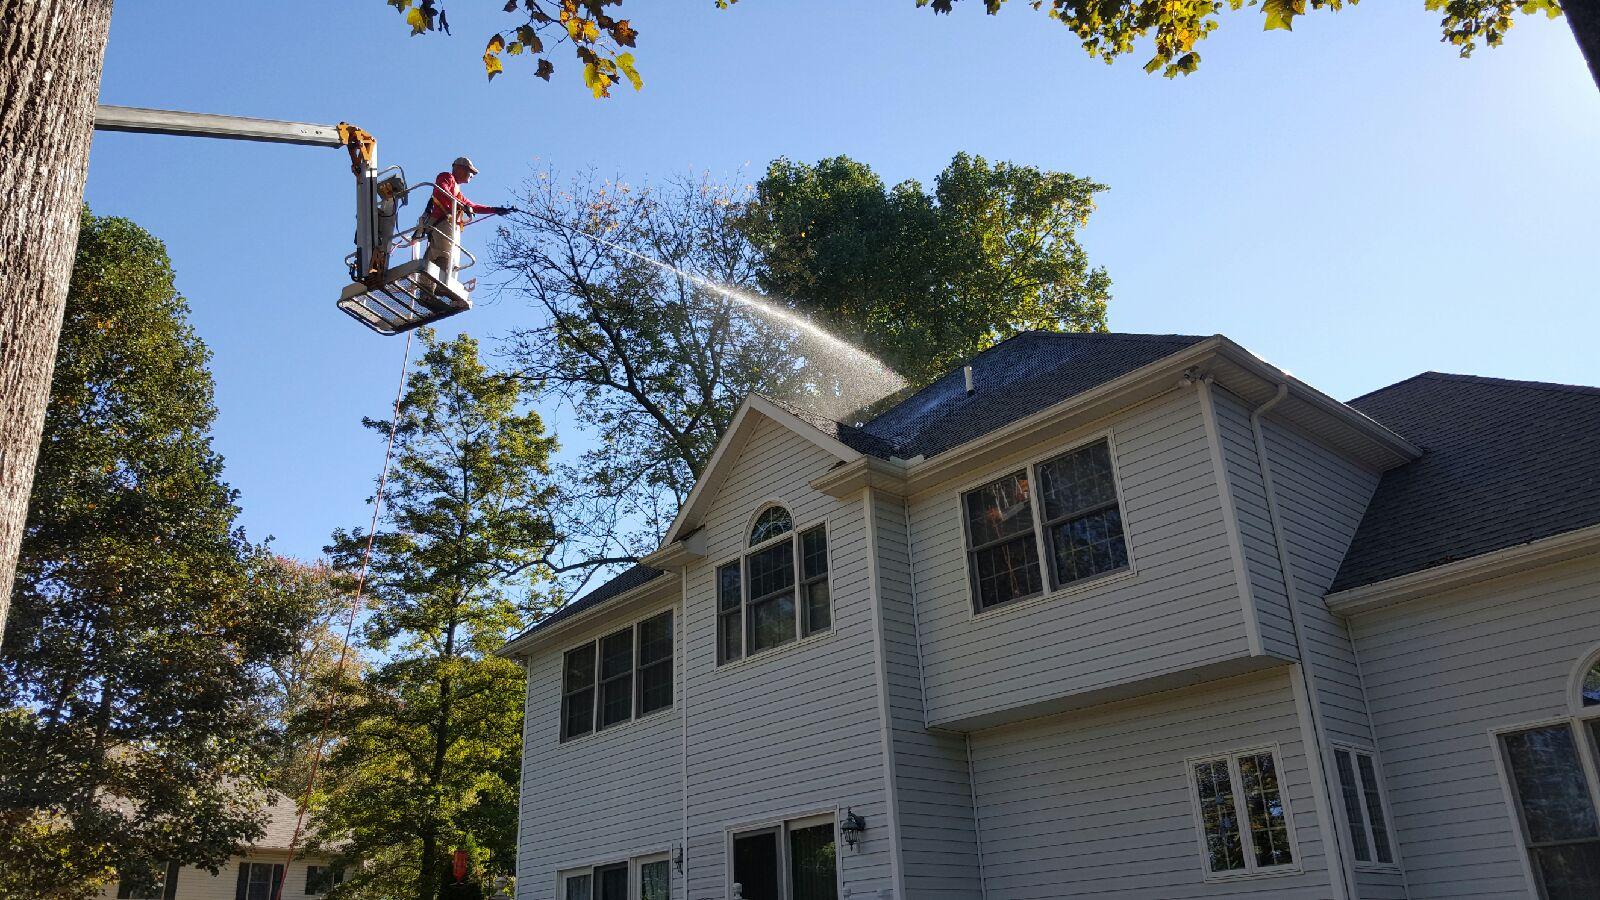 Man on lift above house cleaning algae off roof